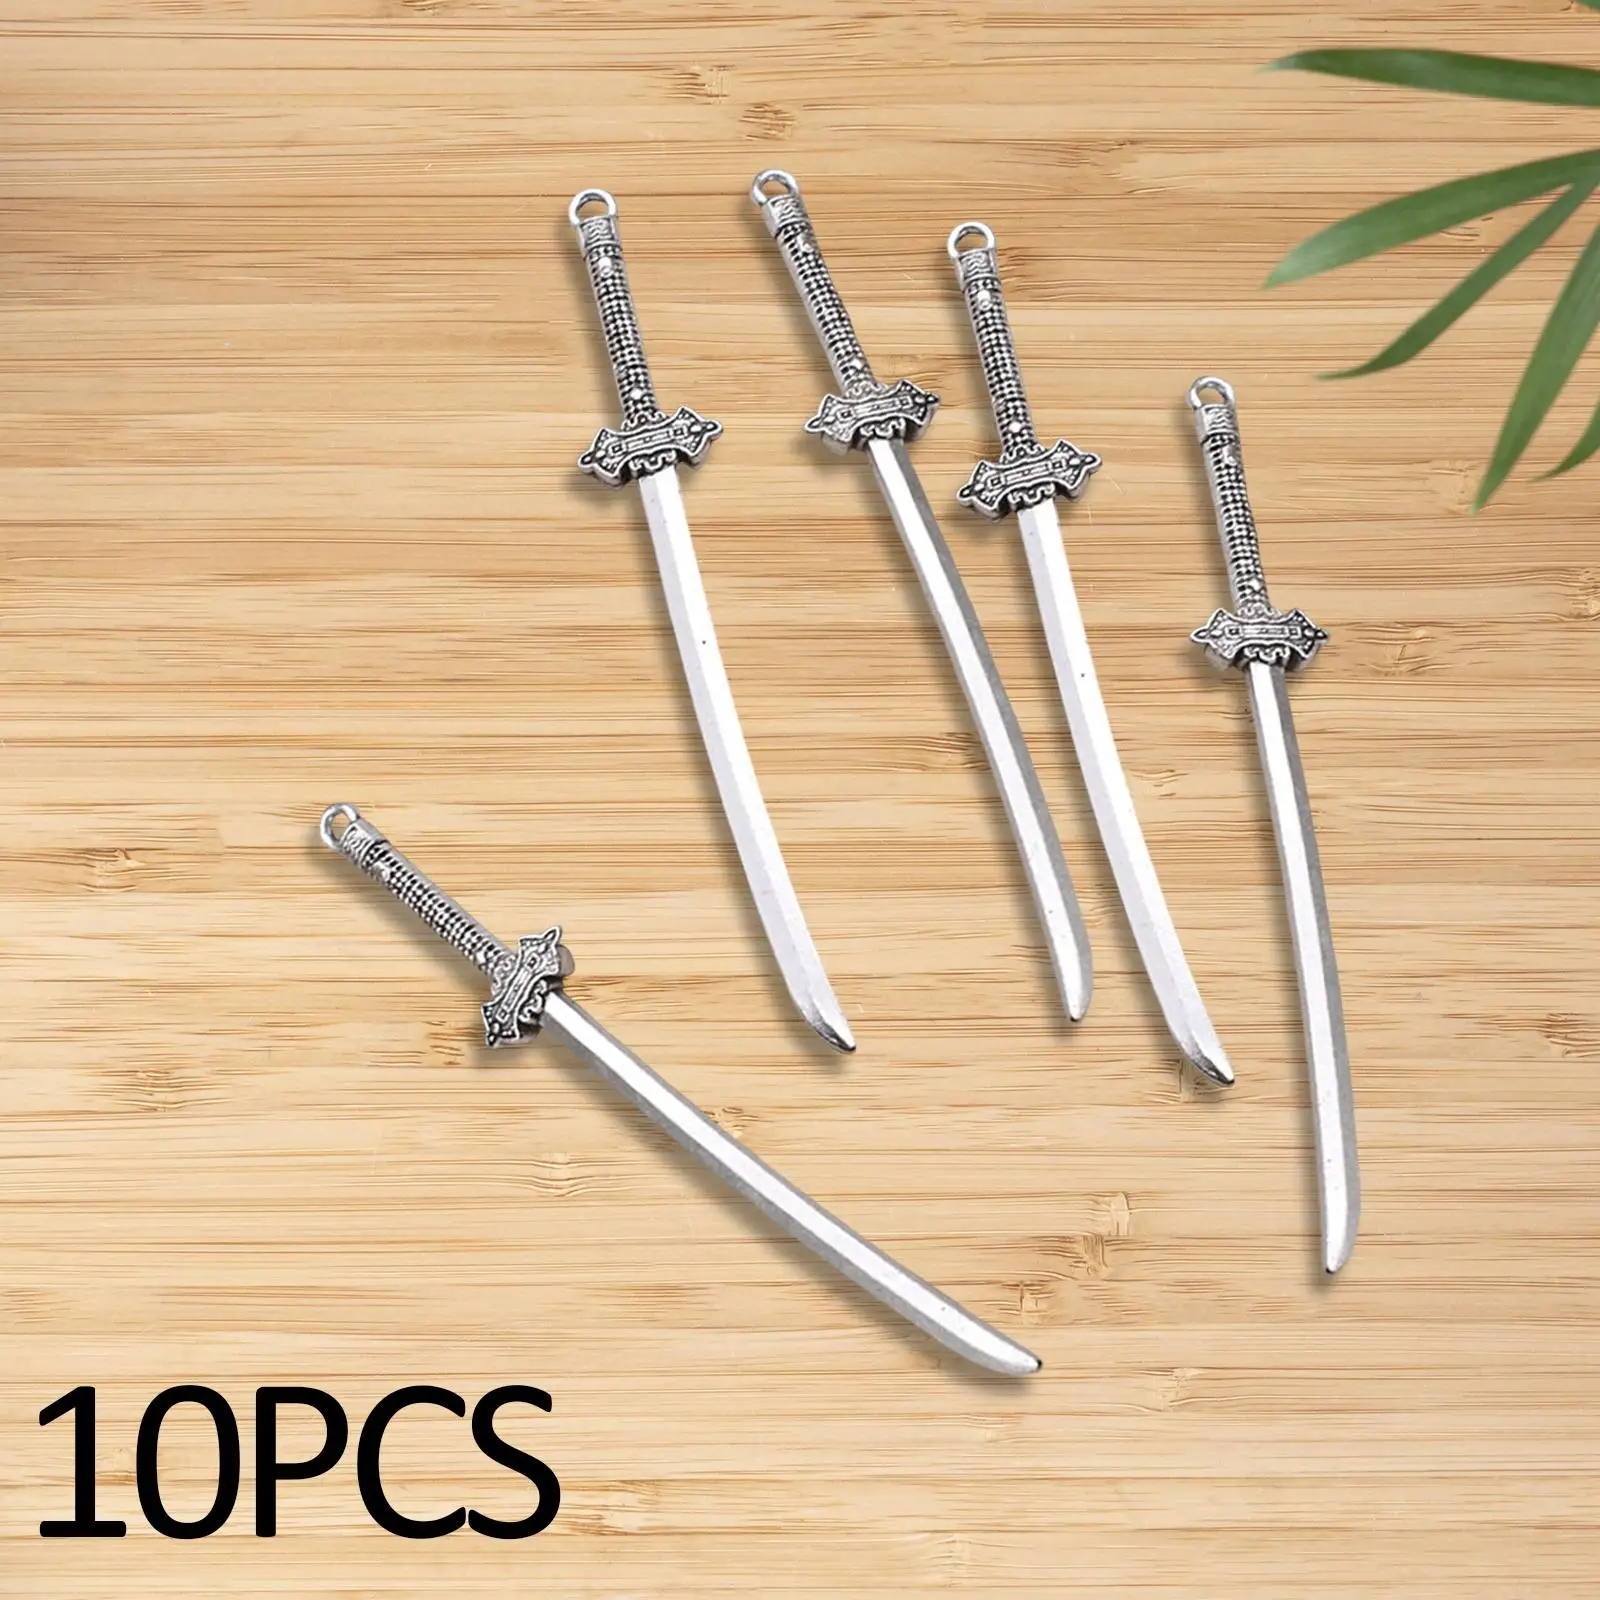 

10 Pieces Retro Knight Knives DIY Jewelry Making Retro Long Knife Cosplay Scense Props Set Dollhouse Decoration 70mmx11mm